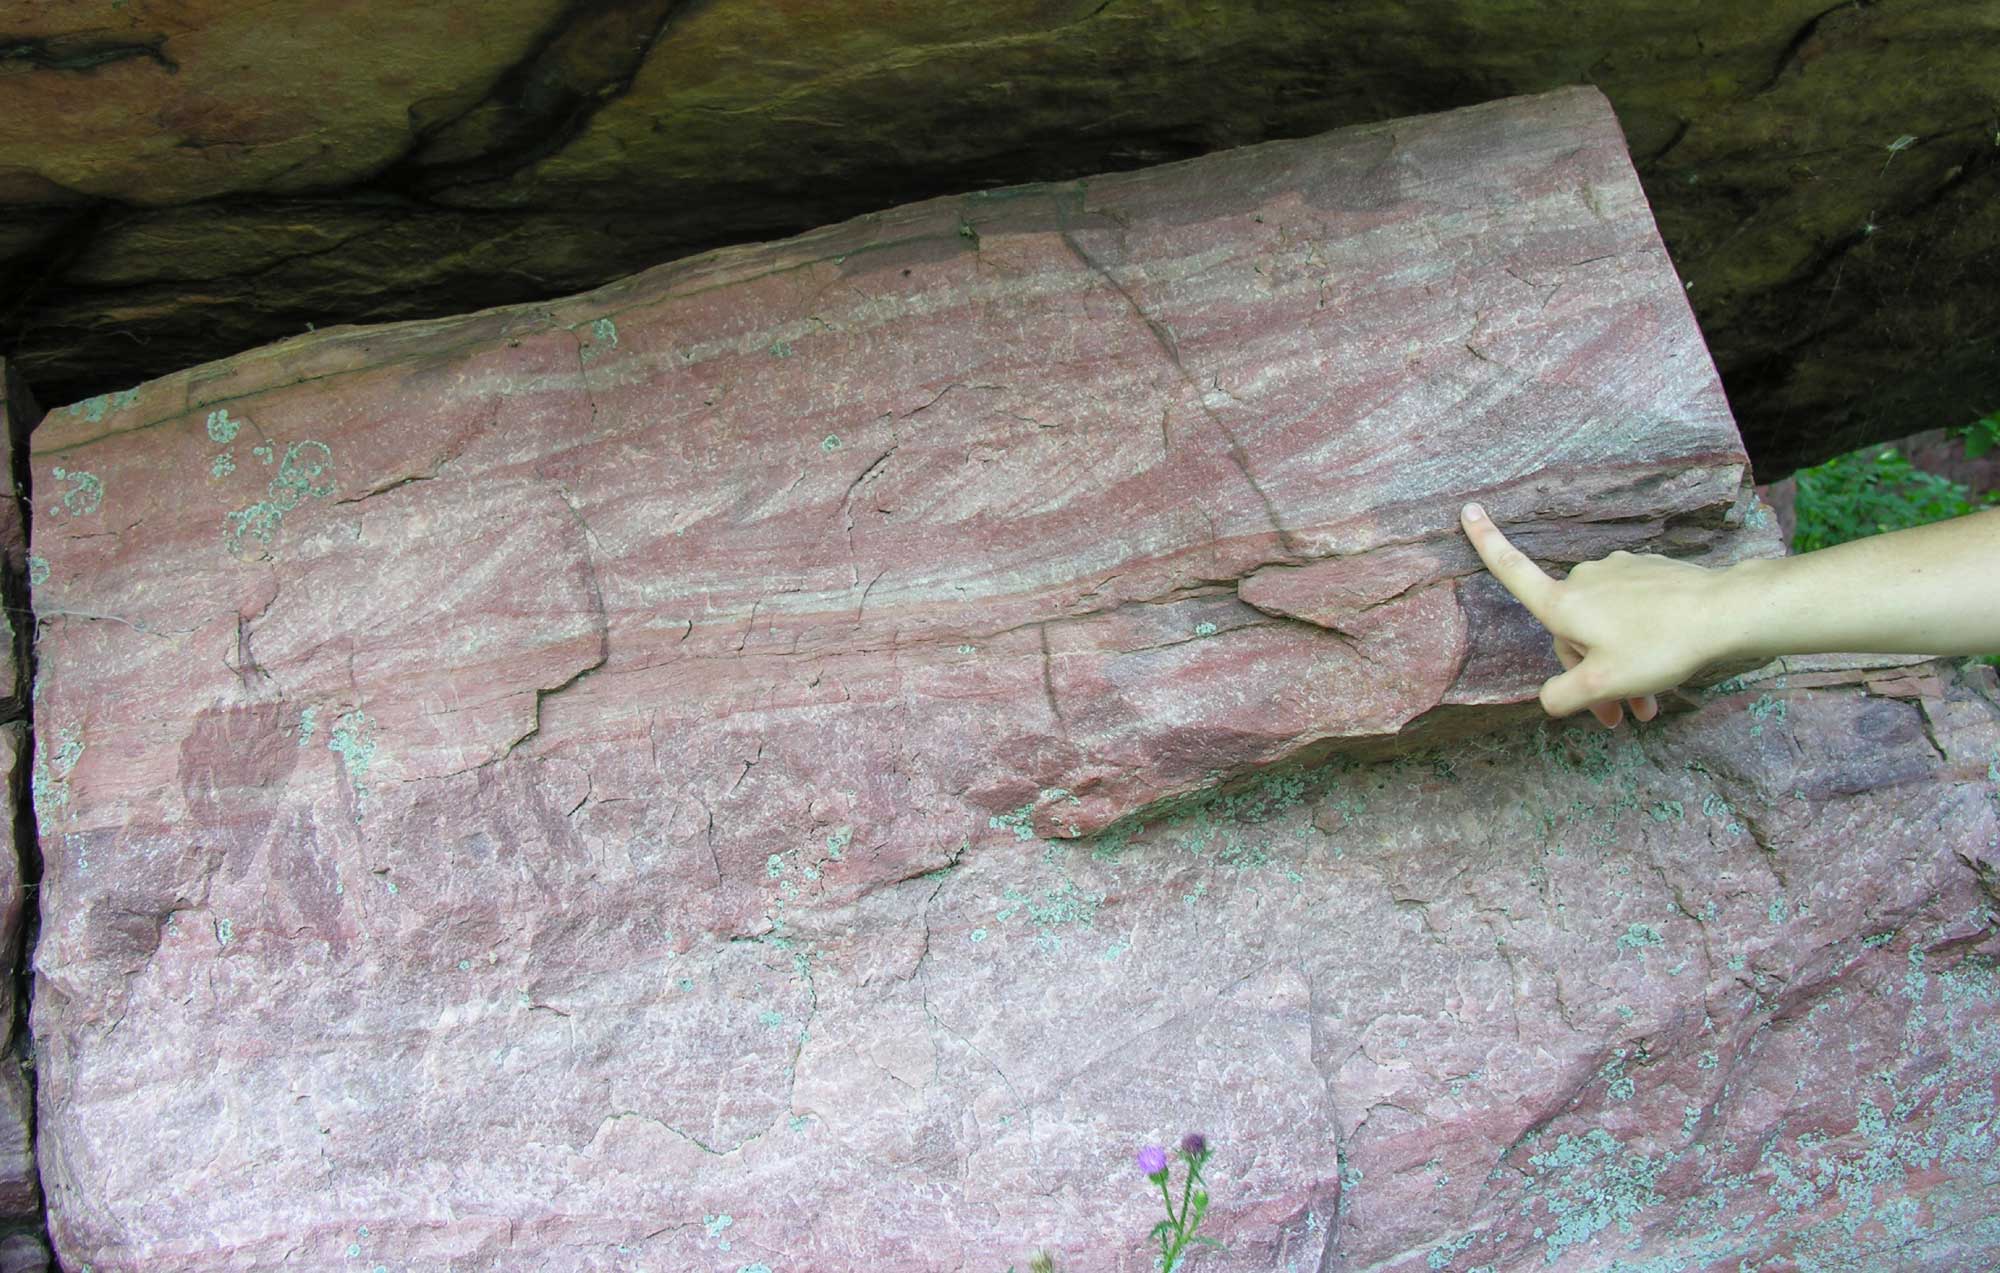 Photograph of Sioux quartzite in Minnesota. The quartzite is pink and shows cross-bedding in one layer. A person is pointing at the cross-bedding.